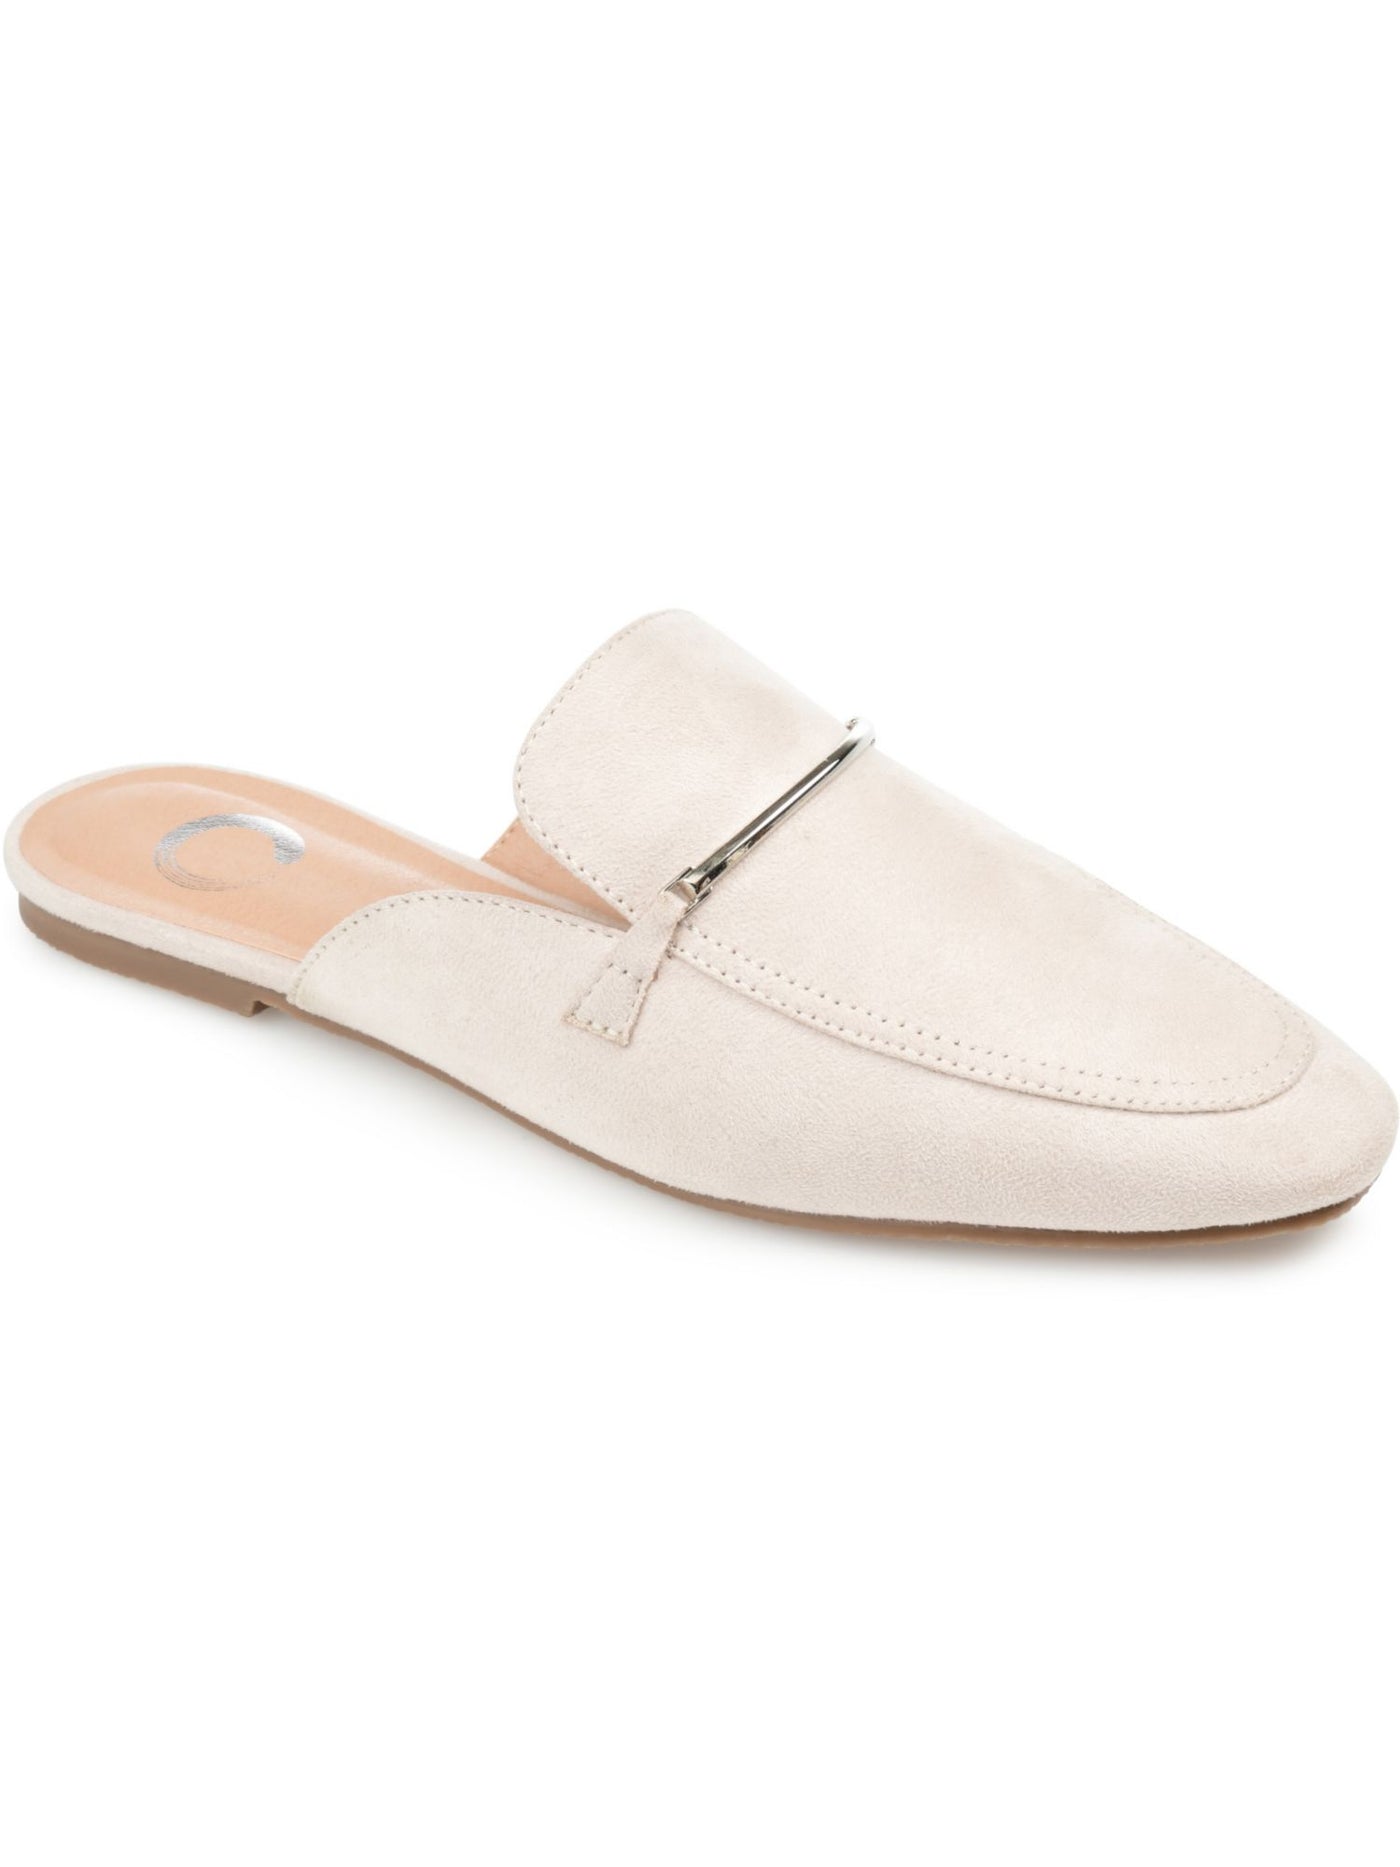 JOURNEE COLLECTION Womens Beige Hardware At Vap Padded Ameena Square Toe Slip On Mules 6